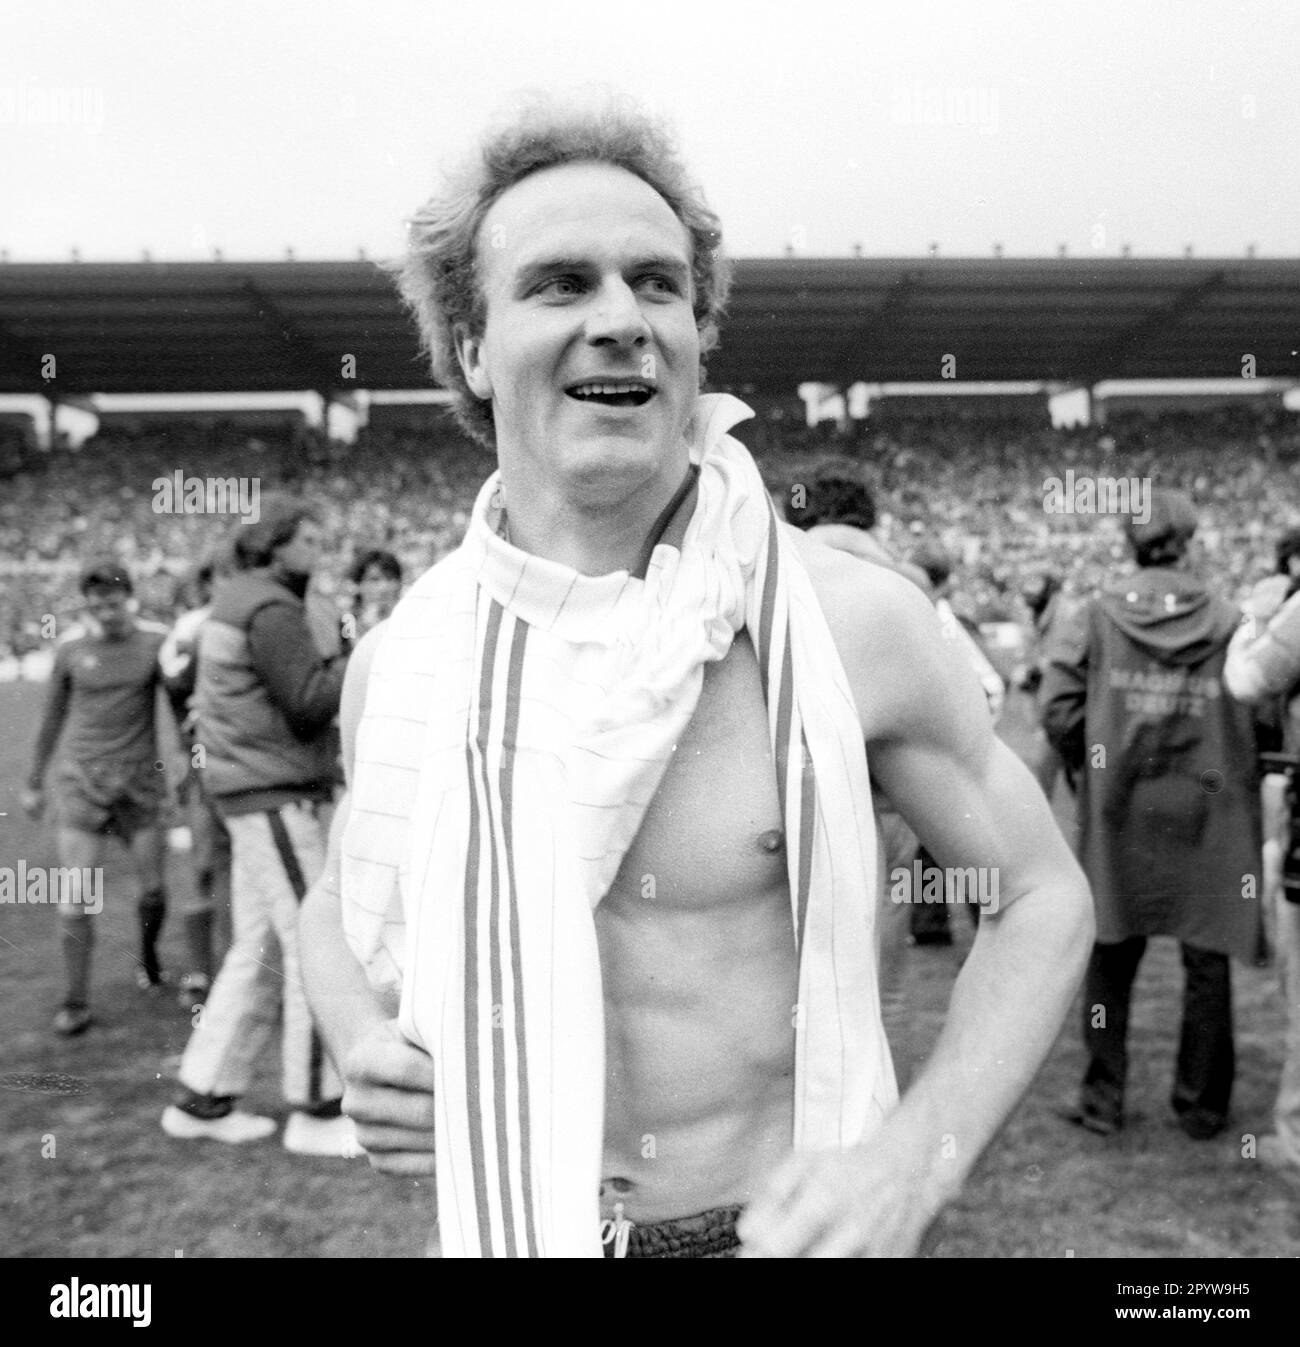 DFB Cup final FC Bayern Muenchen - 1. FC Nuernberg 4:2 /01.05.1982/ Karl-Heinz Rummenigge (FCB) laughs after the game [automated translation] Stock Photo